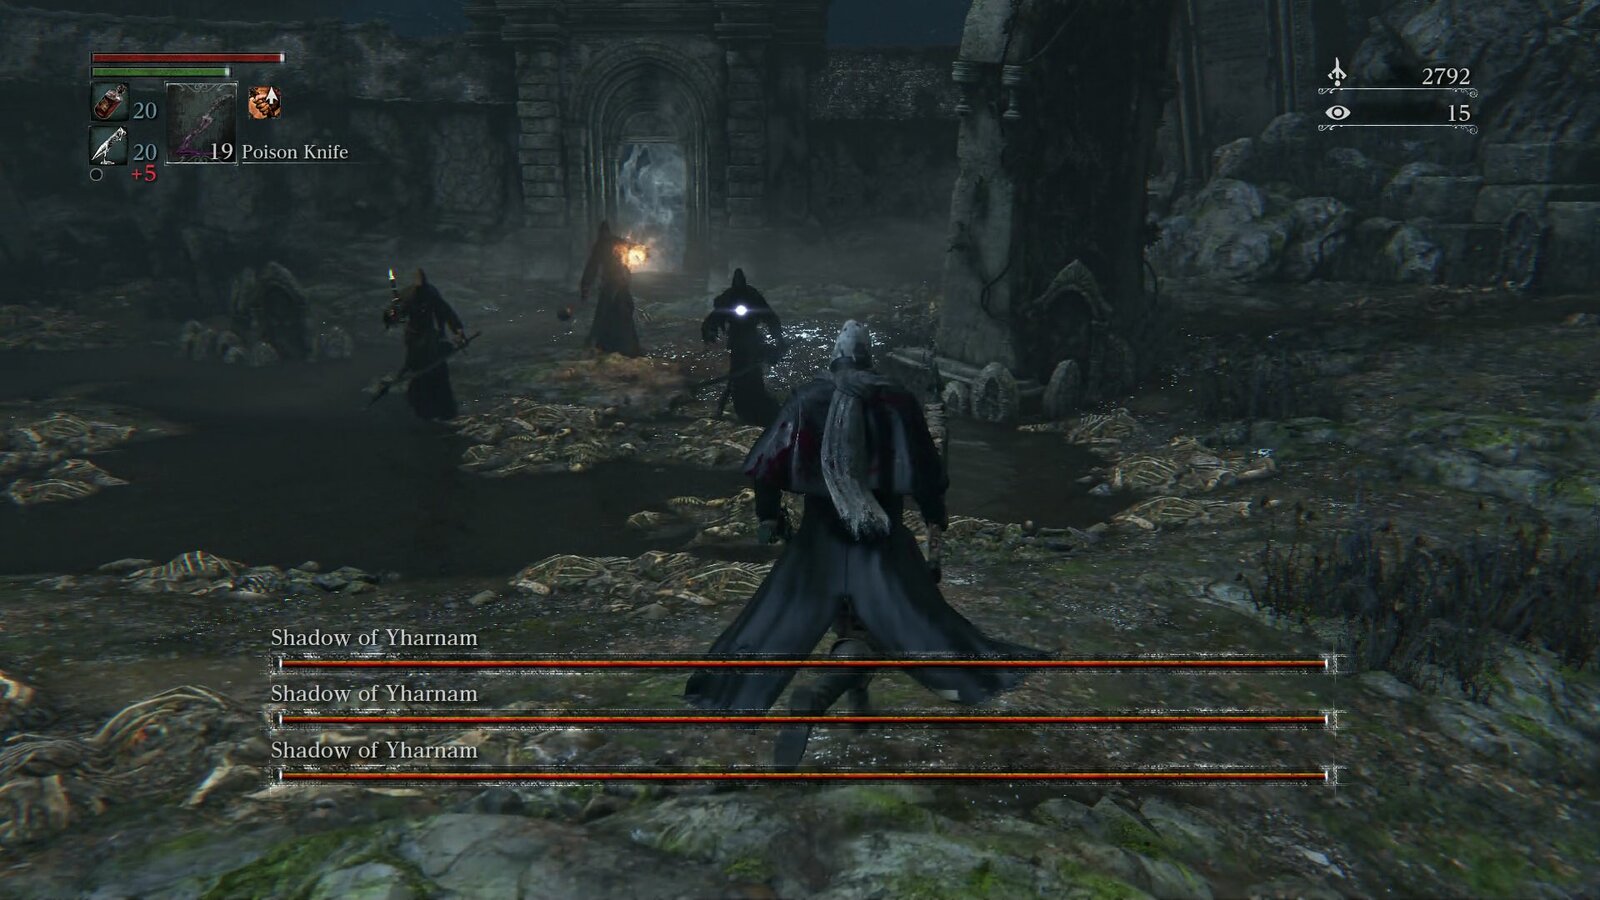 Bloodborne: Game of the Year Edition